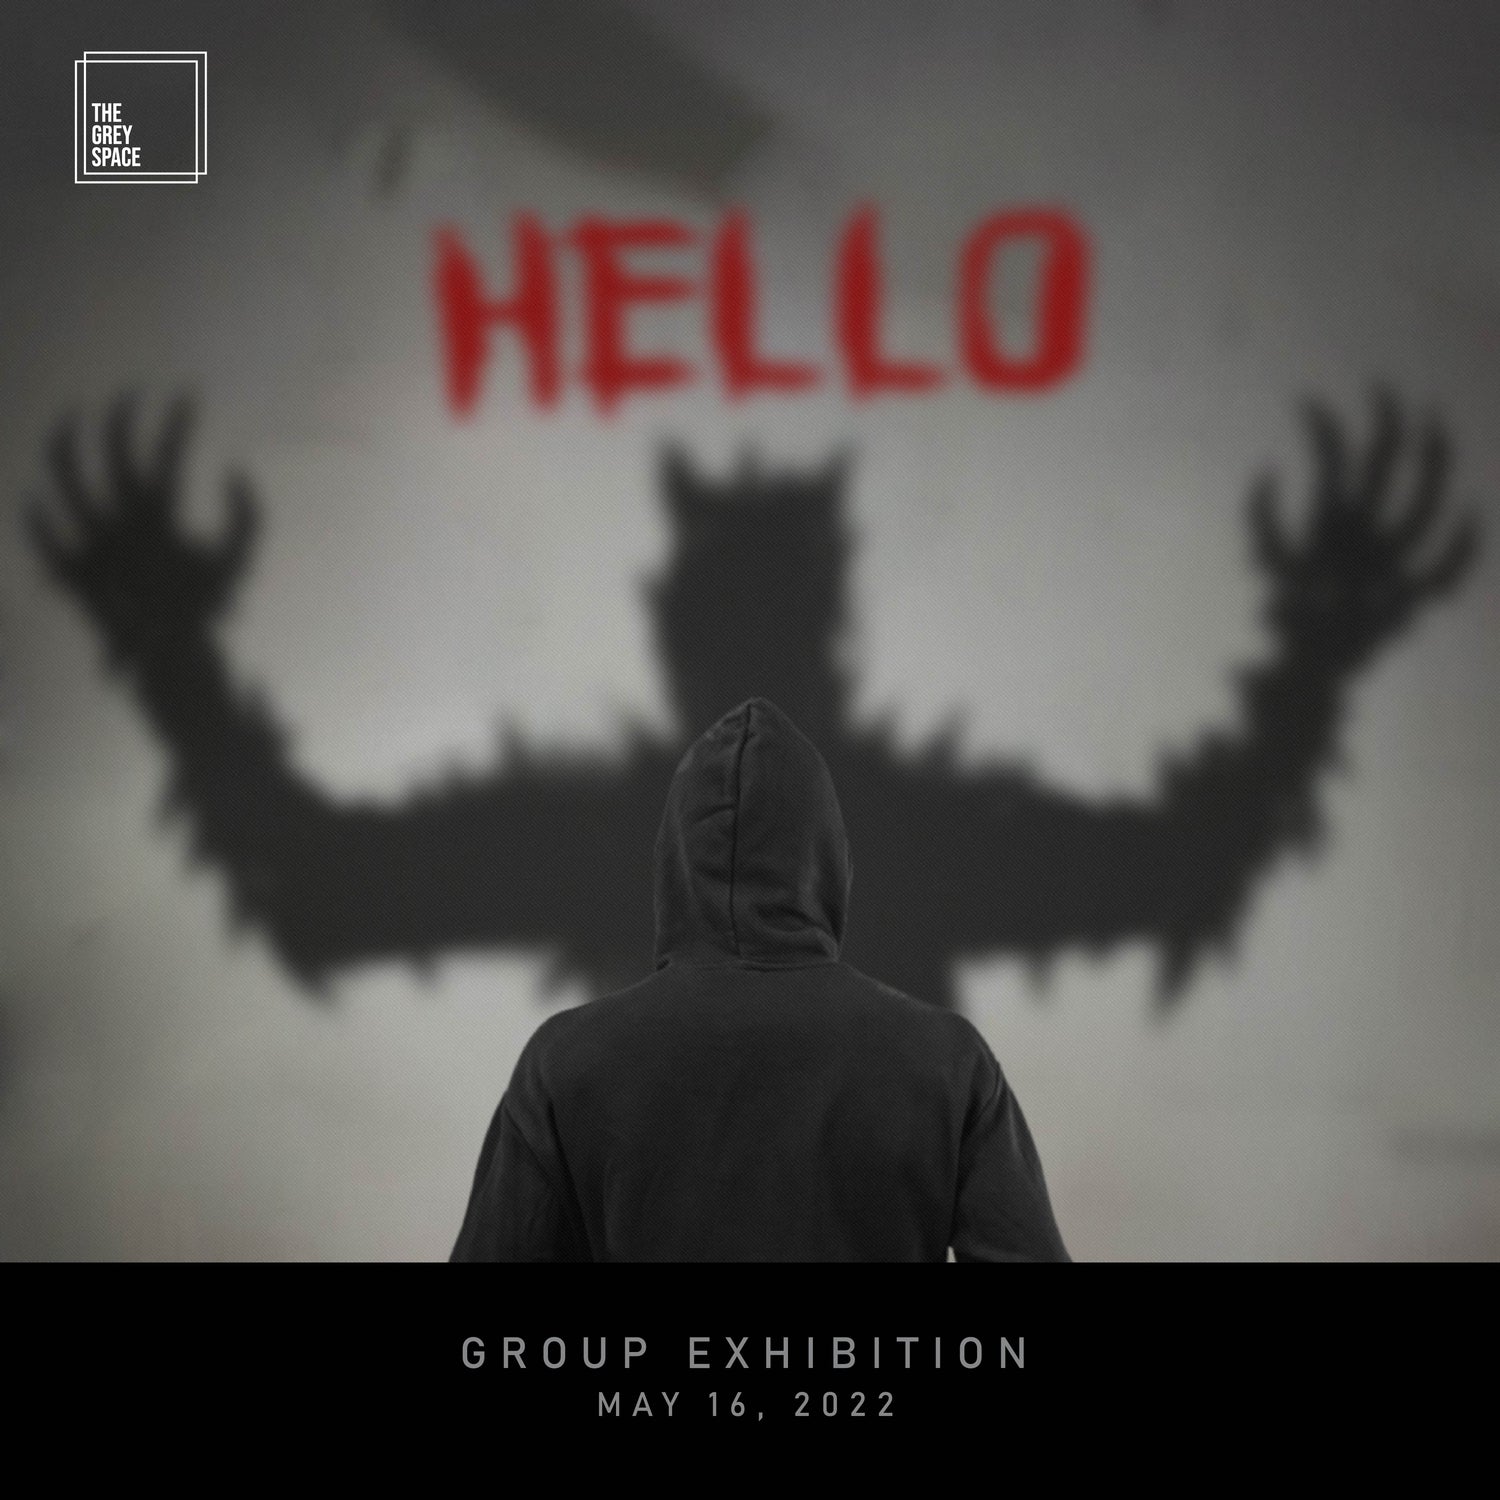 Hello: A Monster and Inner Demons in Mind